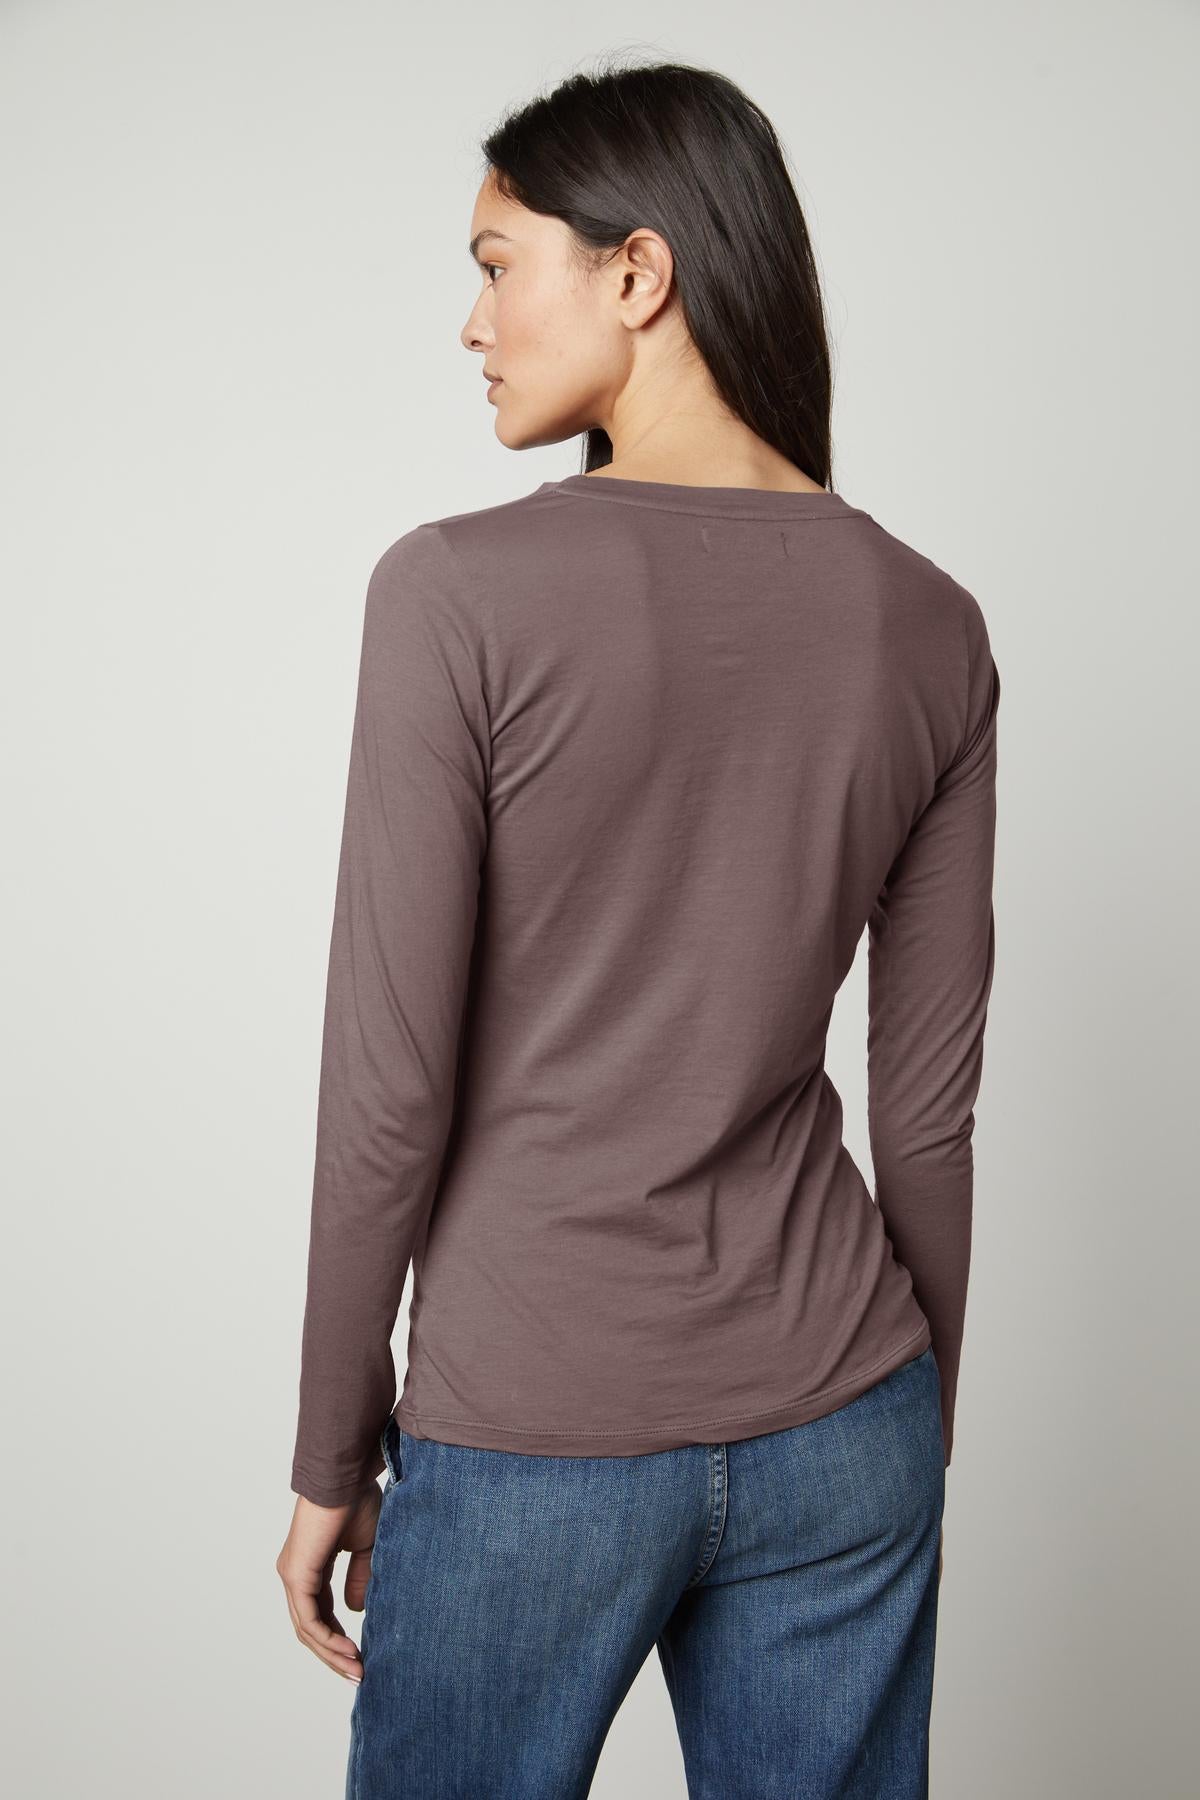 The back view of a woman wearing Velvet by Graham & Spencer jeans and the ZOFINA GAUZY WHISPER FITTED CREW NECK TEE in a universally flattering cut.-35503498952897